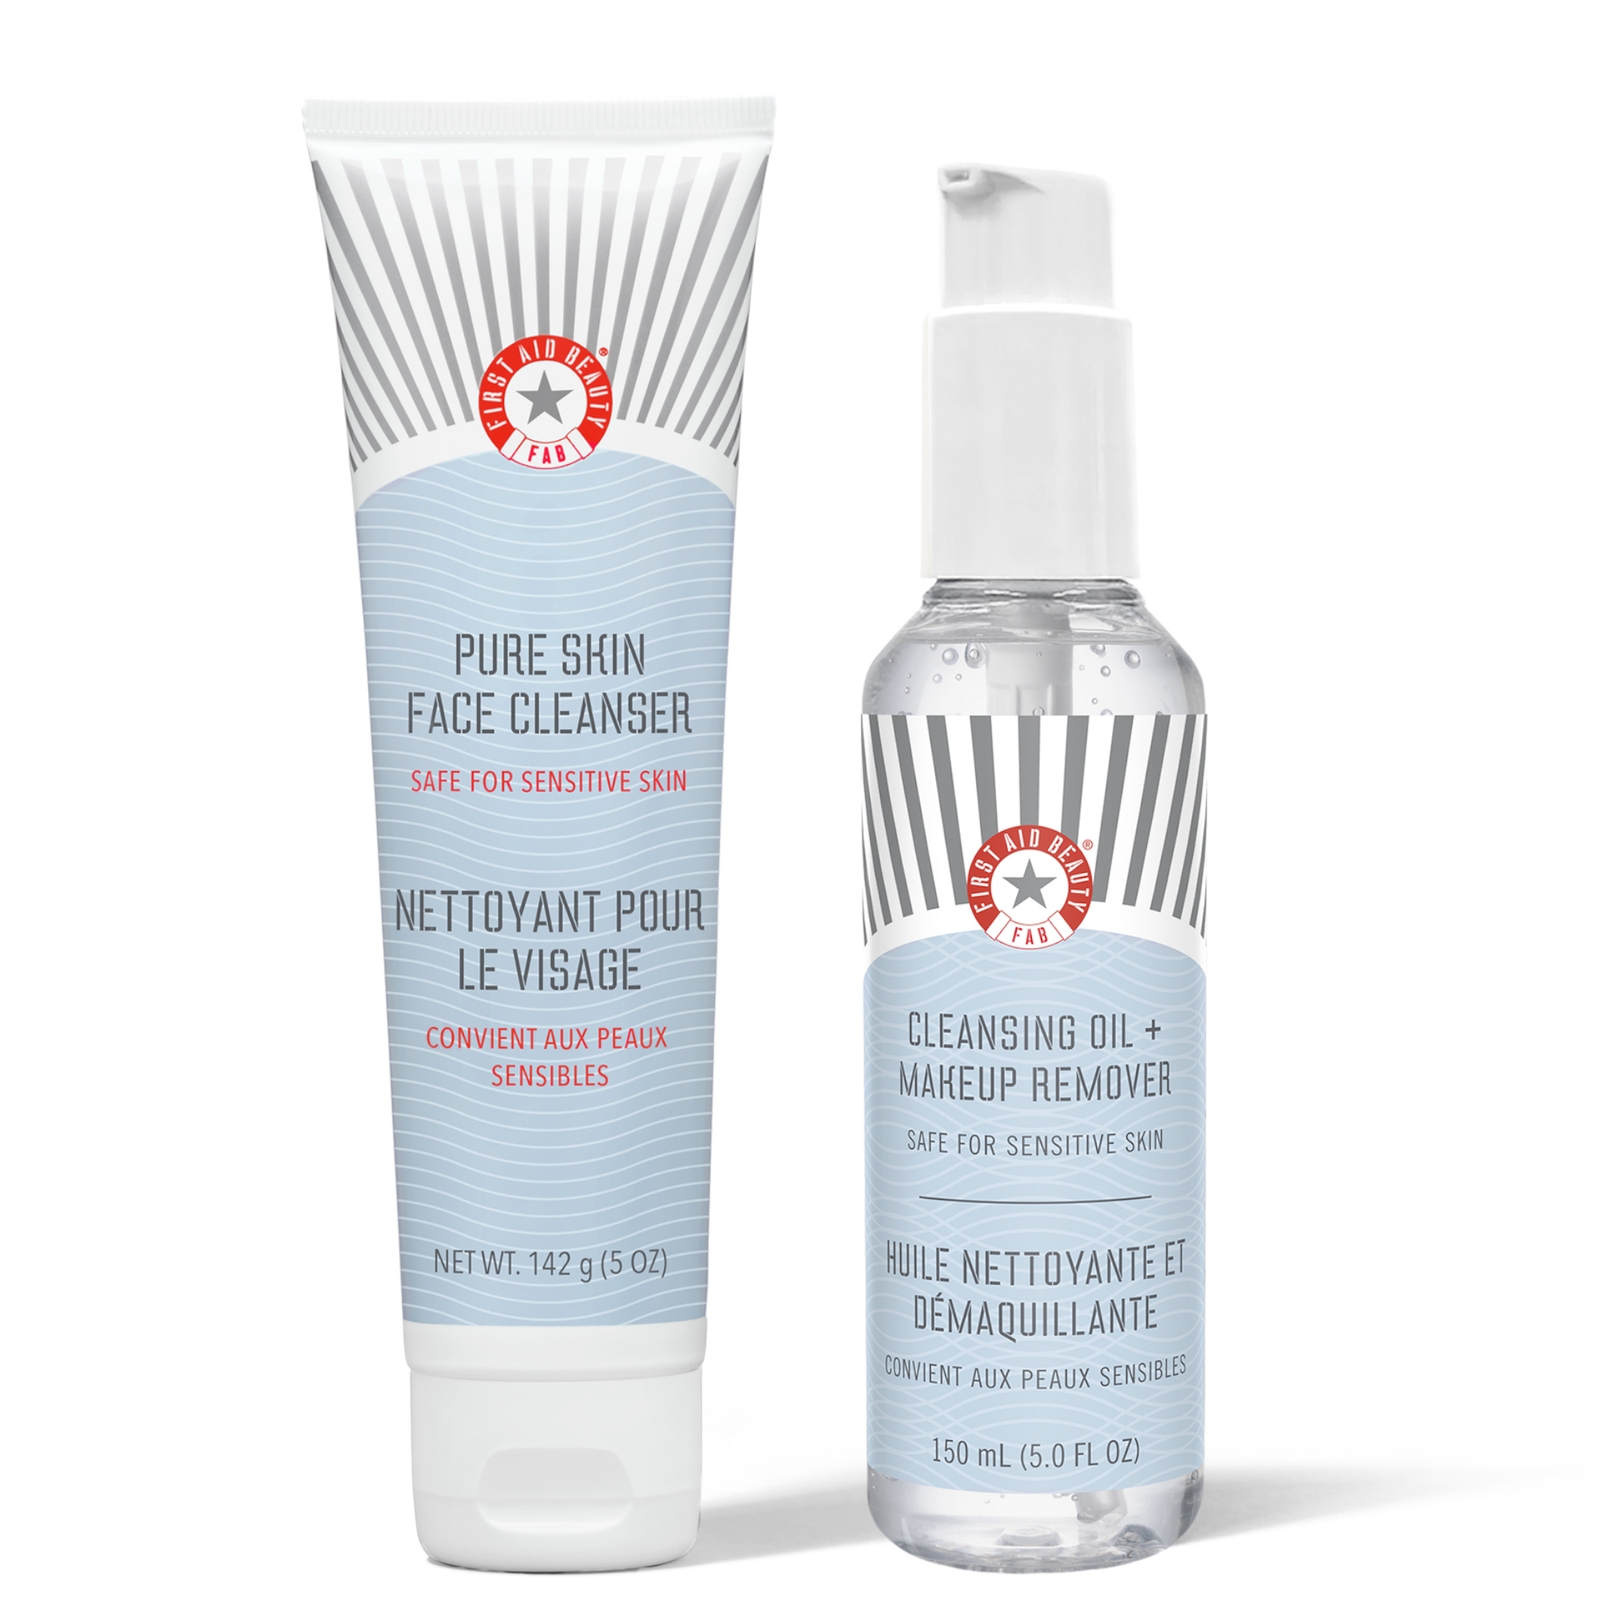 Photos - Facial / Body Cleansing Product FIRST Austria First Aid Beauty Double Cleanse Bundle FABDCB 